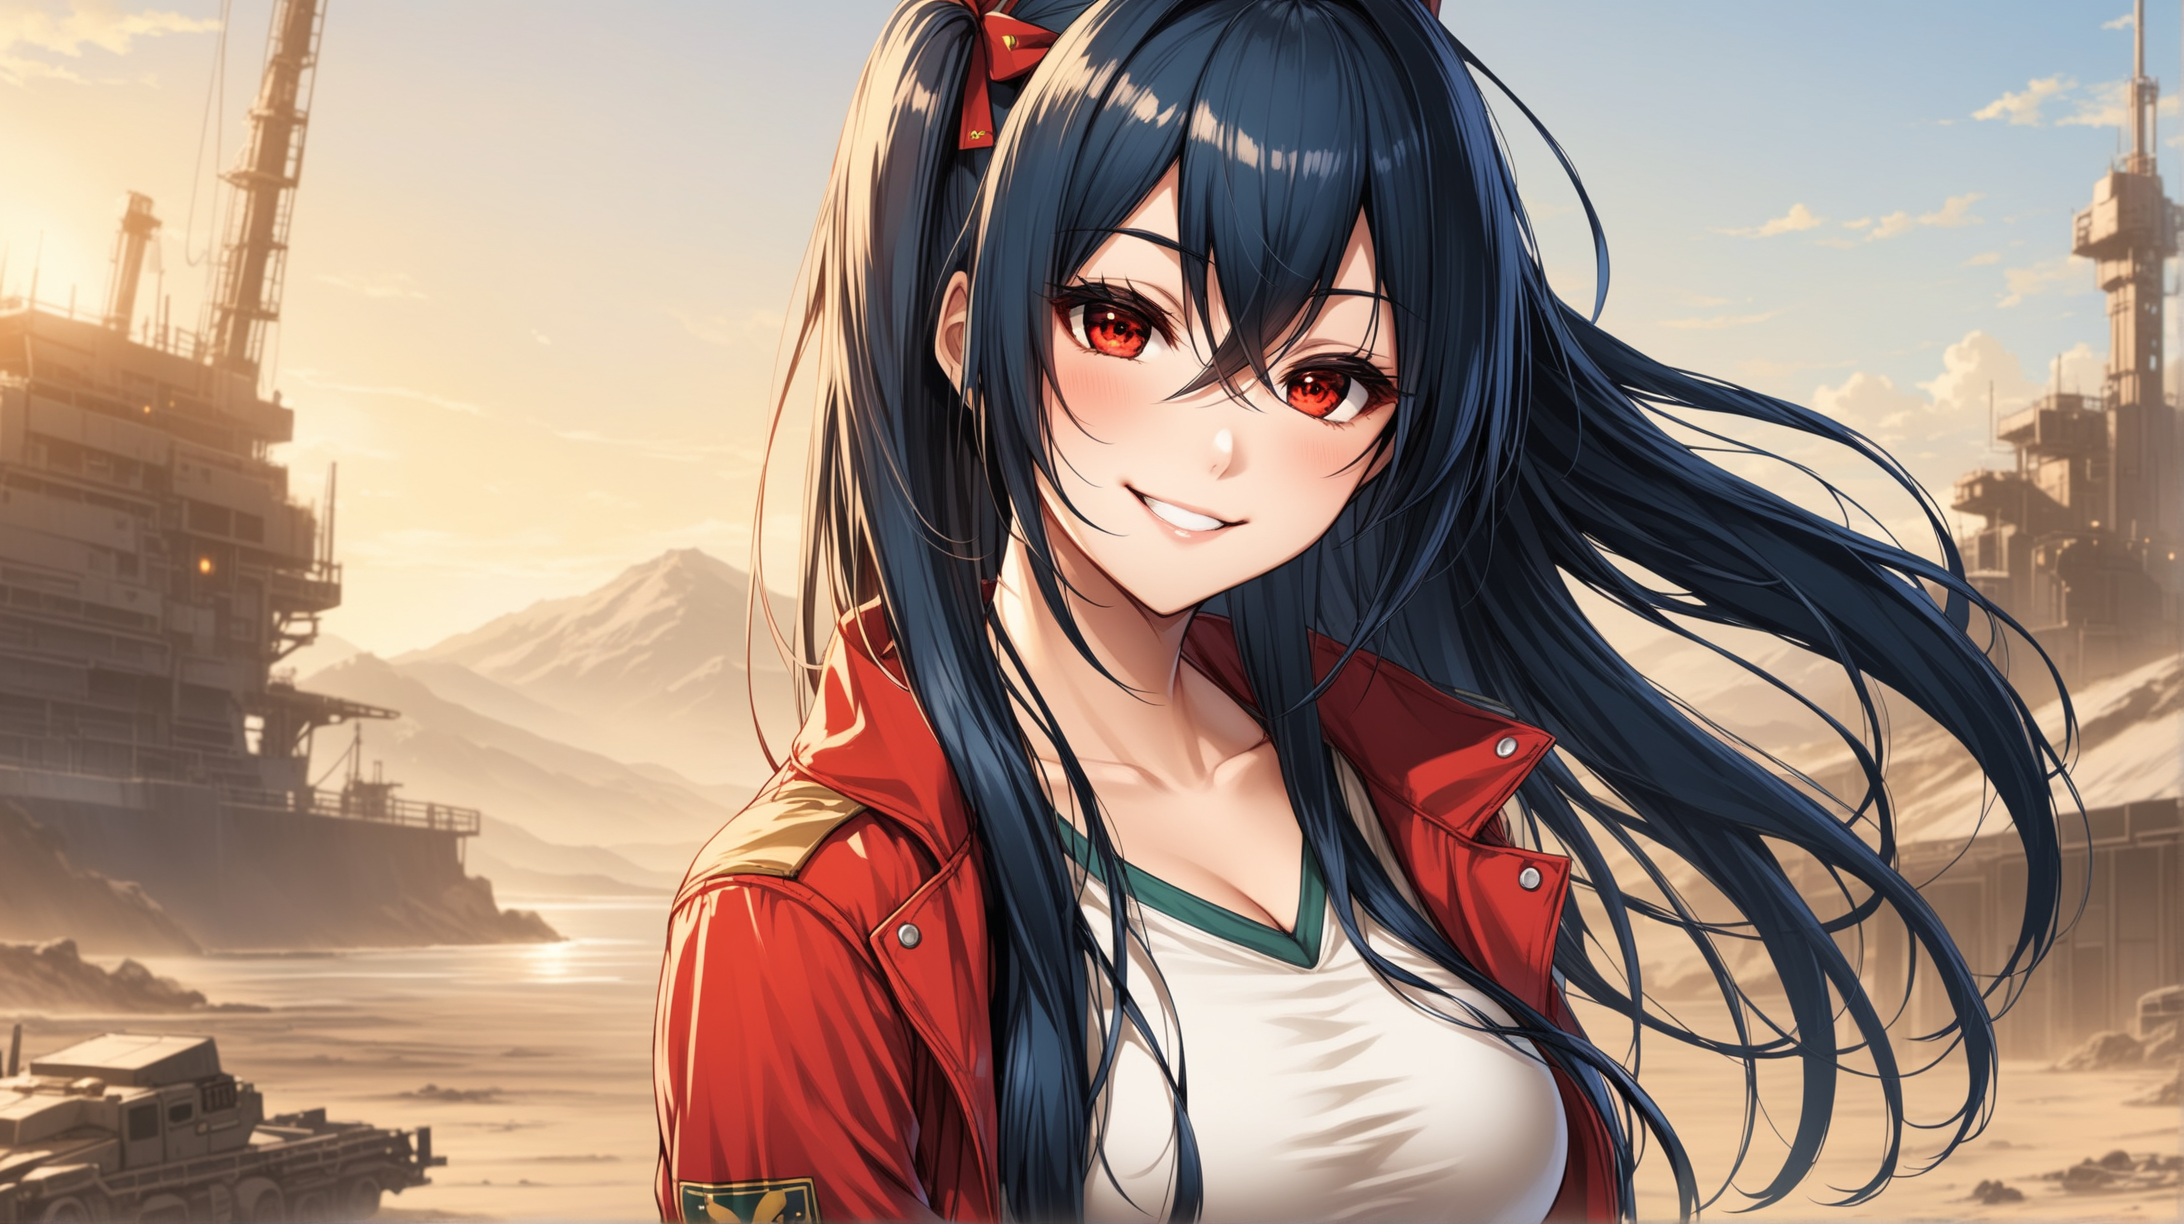 Draw the character Taihou from Azur Lane, red eyes, long hair, high quality, outdoors, in a casual pose, wearing an outfit inspired from the Fallout series, smiling at the viewer